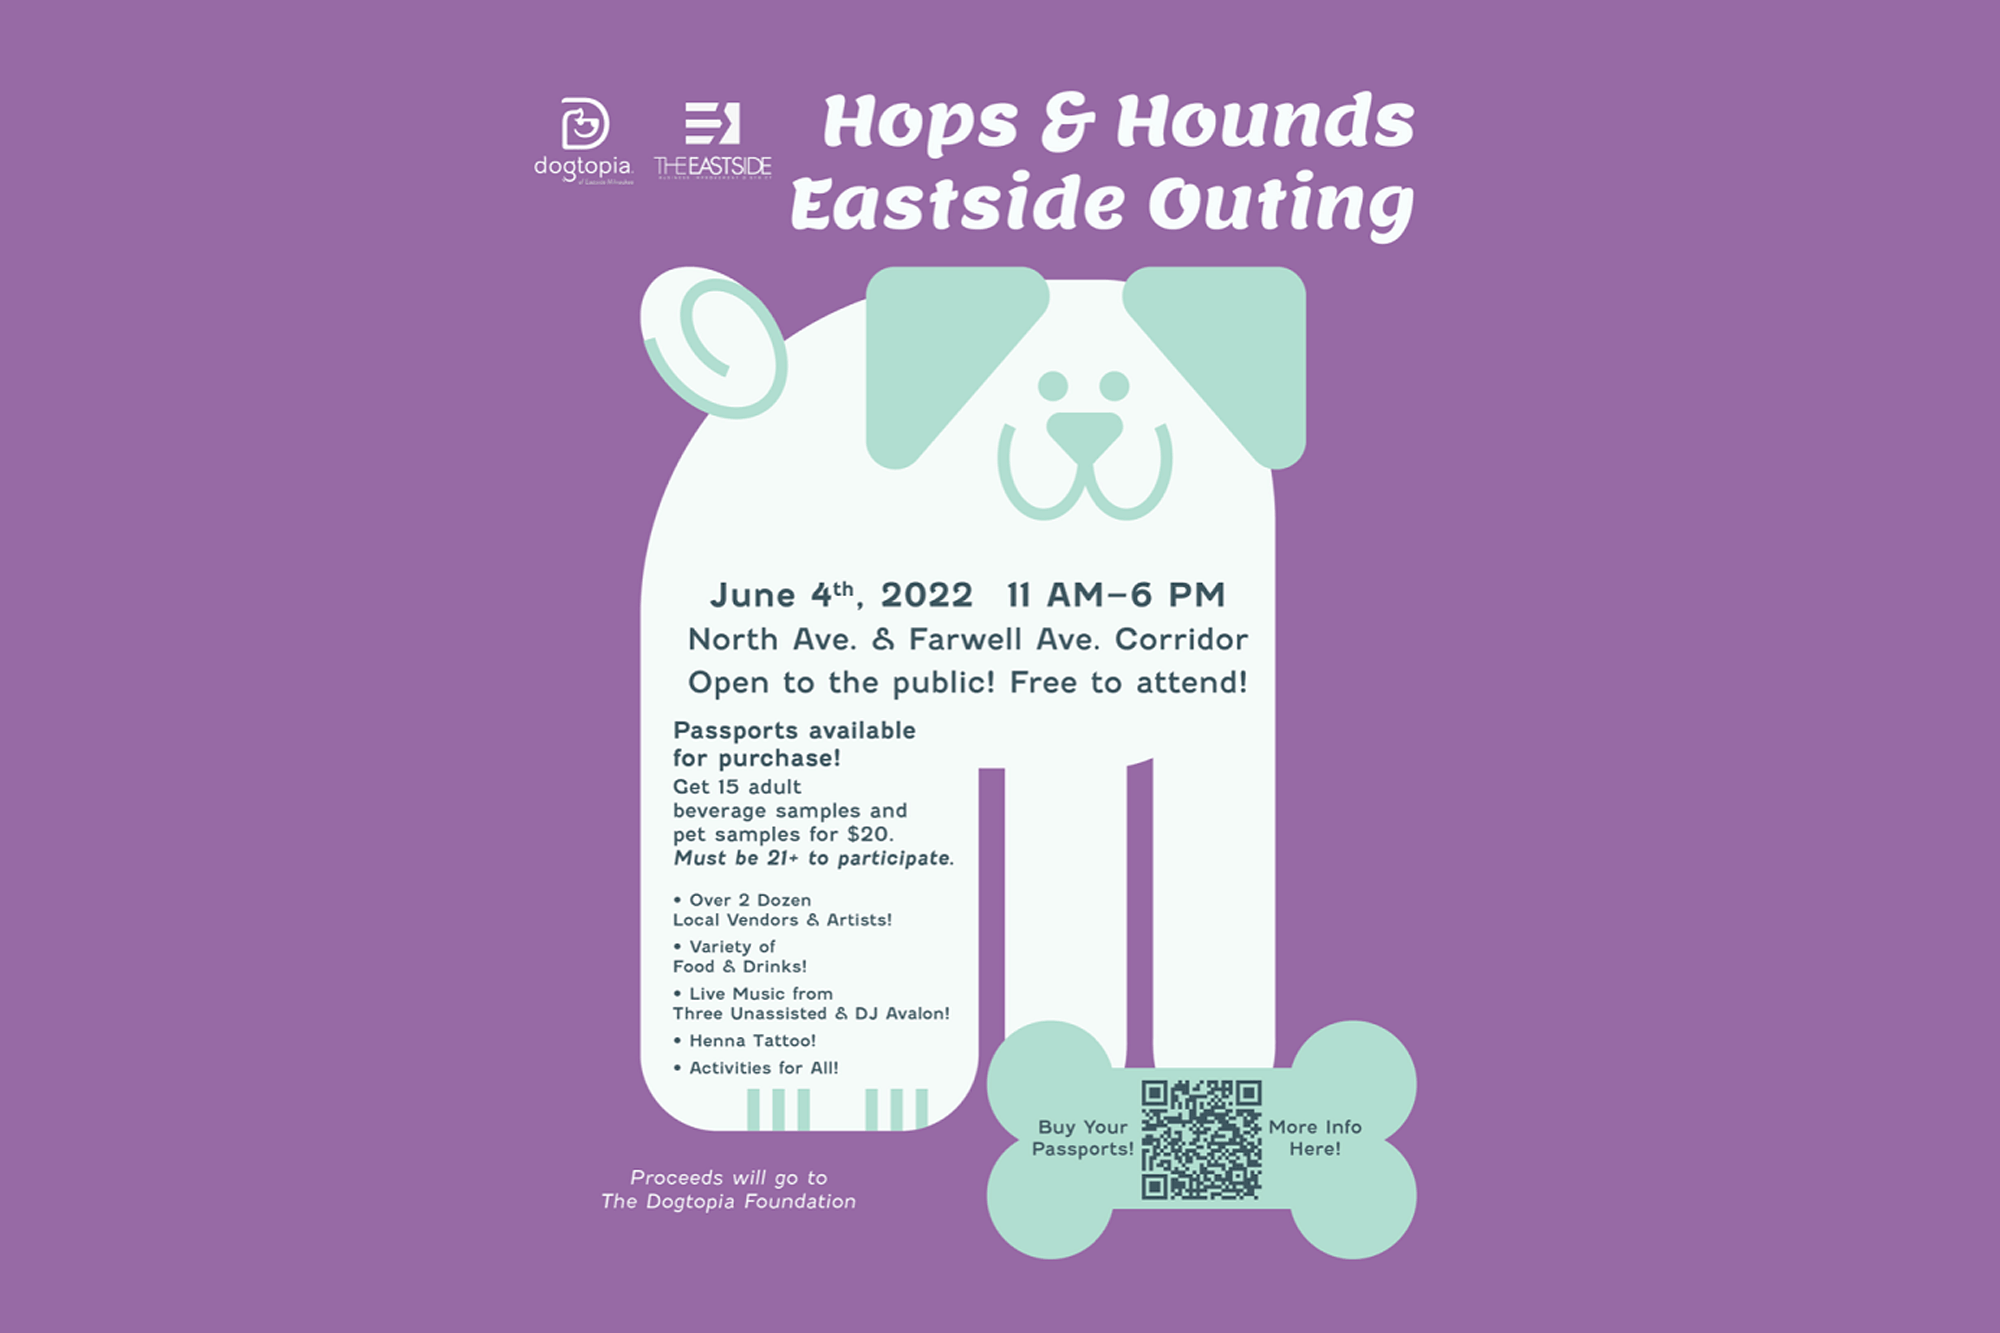 Hops & Hounds East Side Outing